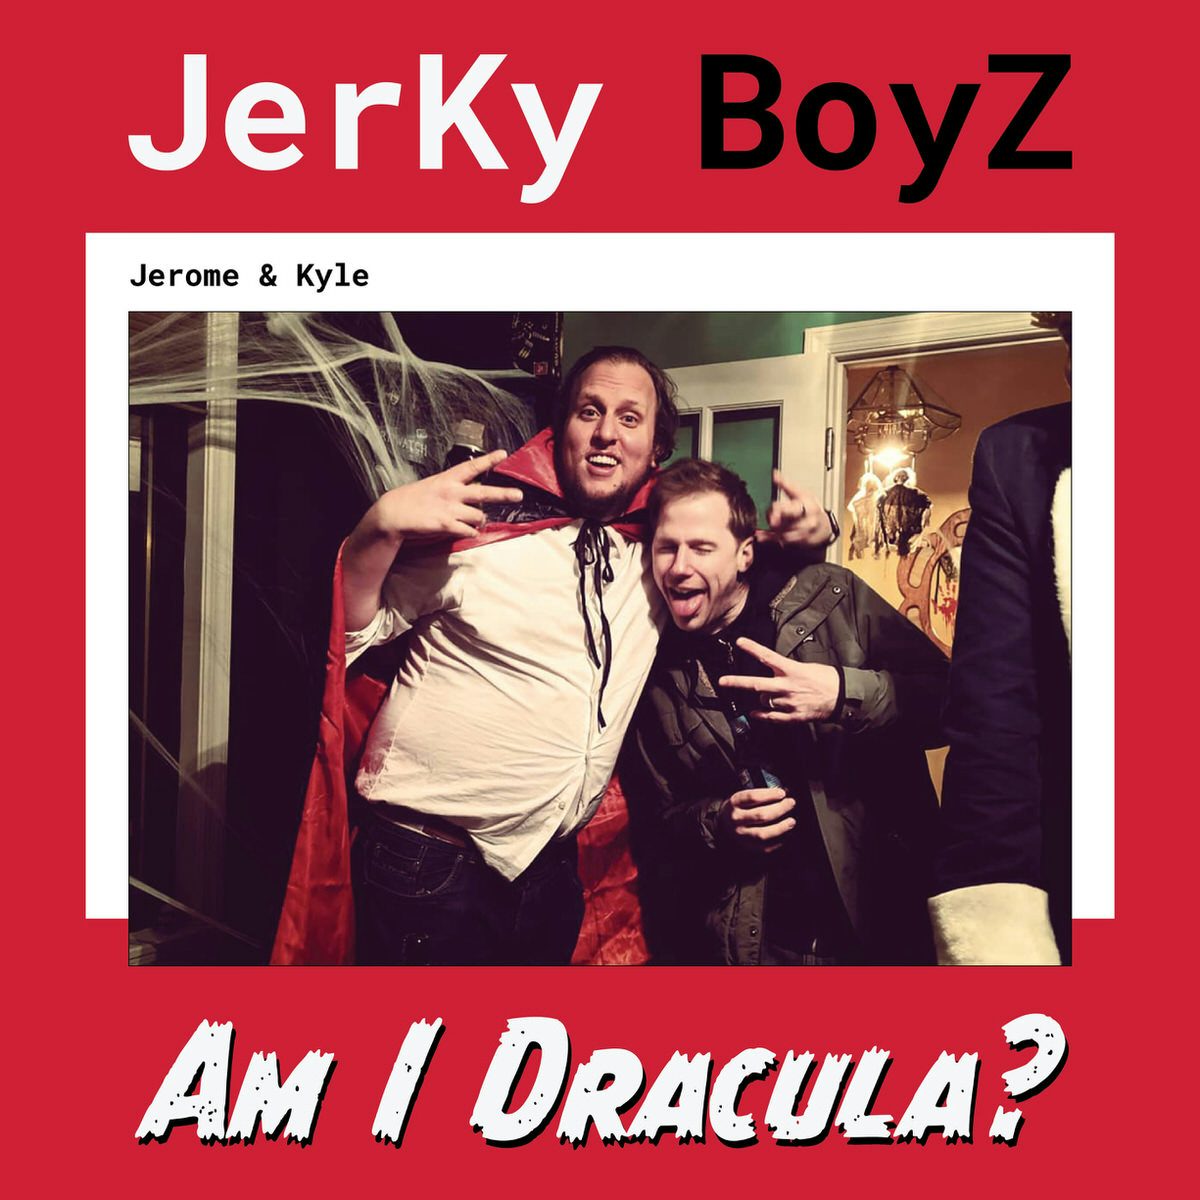 The Album Cover of “Am I Dracula?” A photo Jer & Ky as they embrace and throw up peace signs. Ky is on the left dressed as Dracula complete with cape. Jerome has a beer in hand and a regular coat. There are cob-webs behind them as this look to be a Halloween party and Jerome did not know.